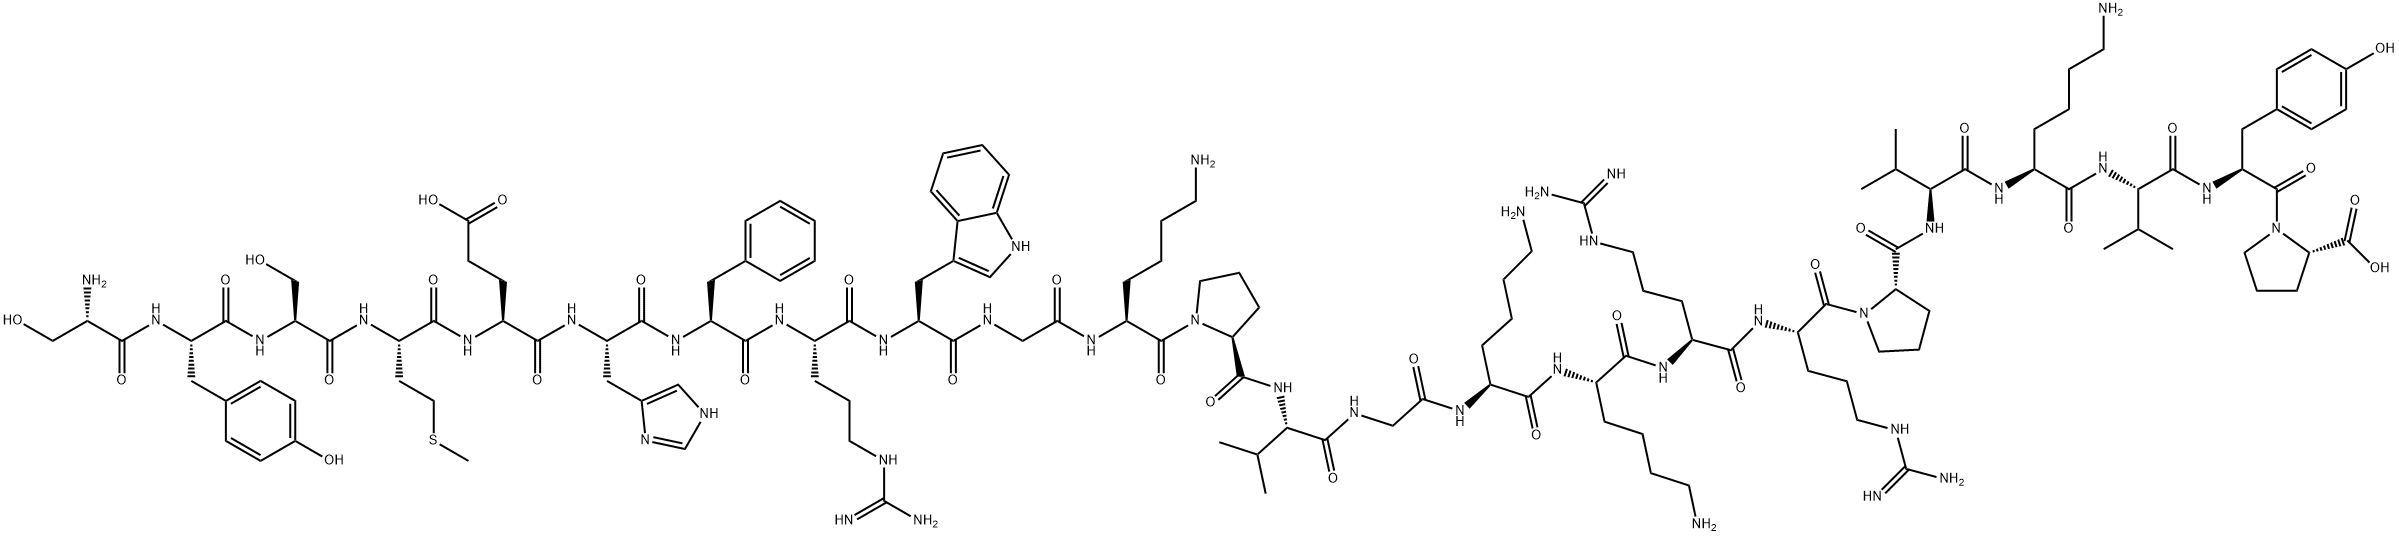 Tetracosactide acetate Structural